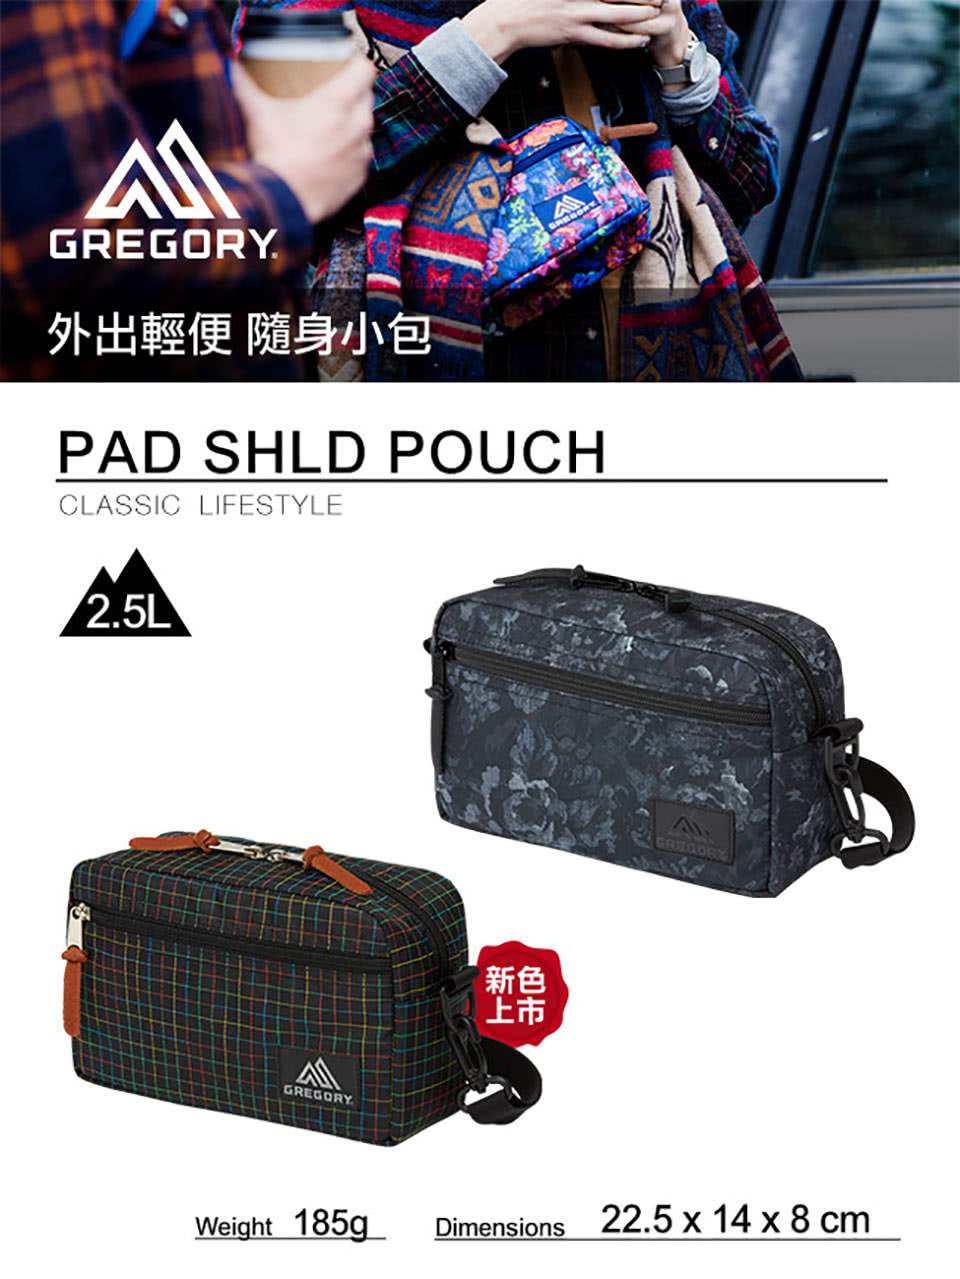 Gregory 2.5L PAD SHLD POUCH斜背包